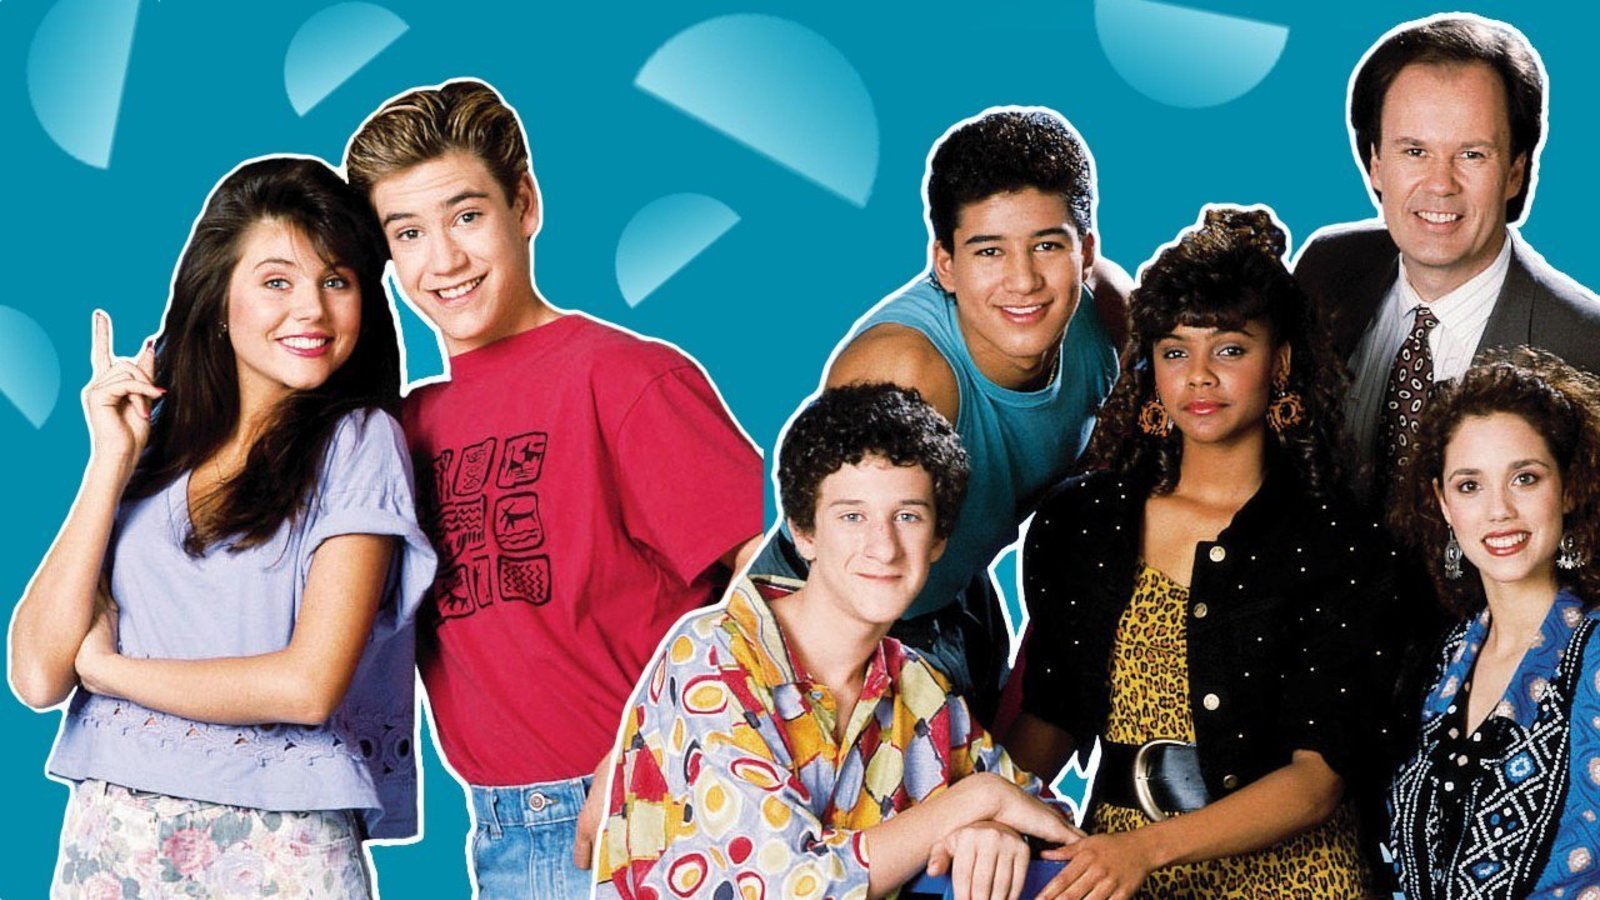 The cast of 'Saved By the Bell': Where are they now? 